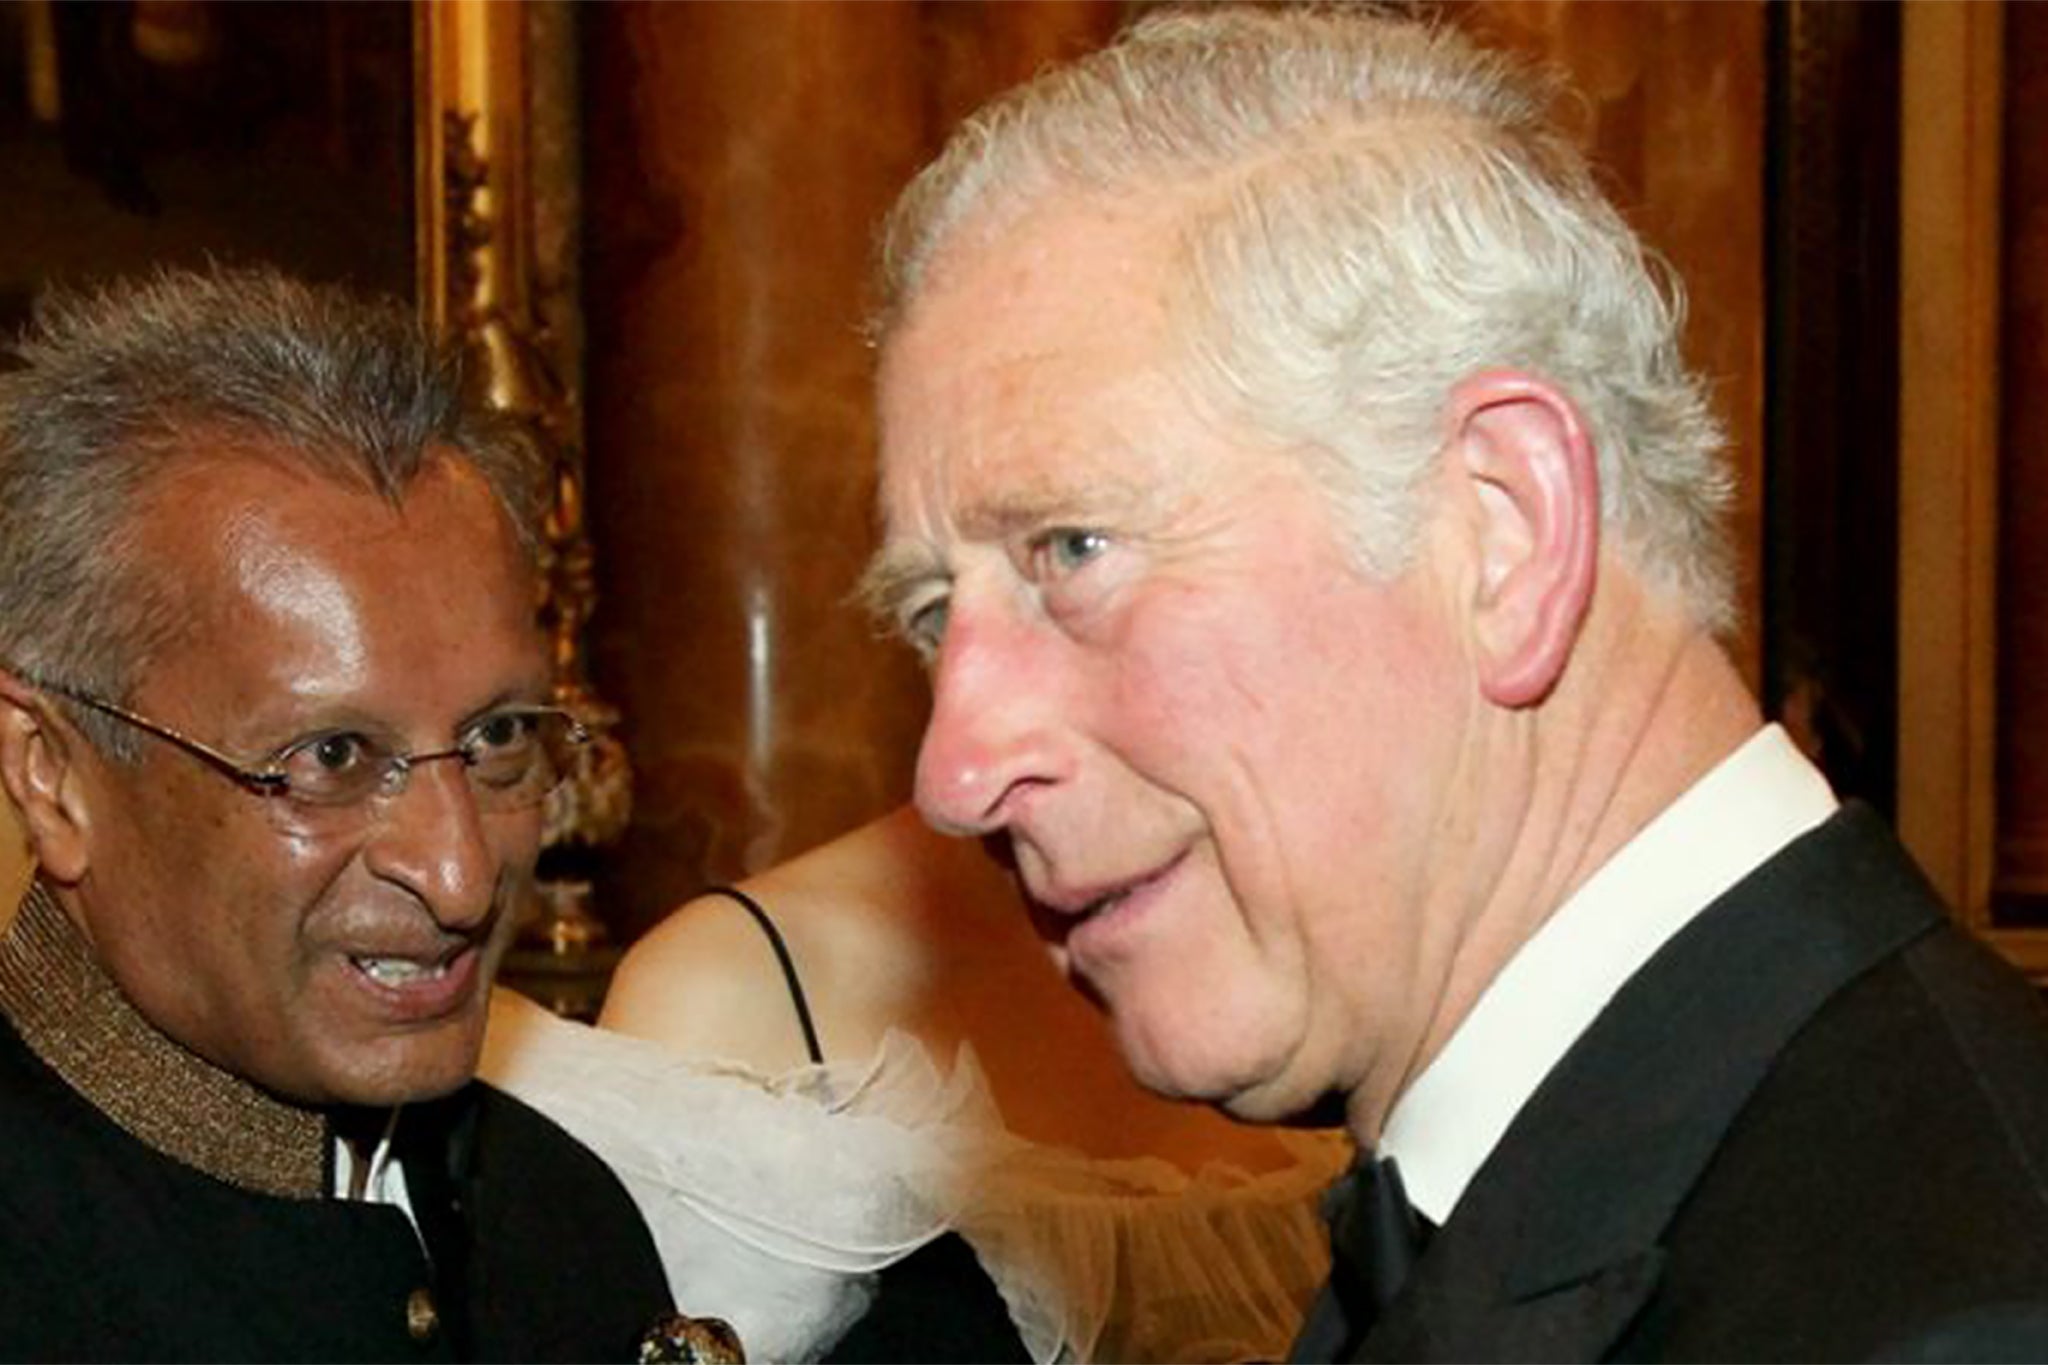 Mohamed Amersi and King Charles, who was then the Prince of Wales